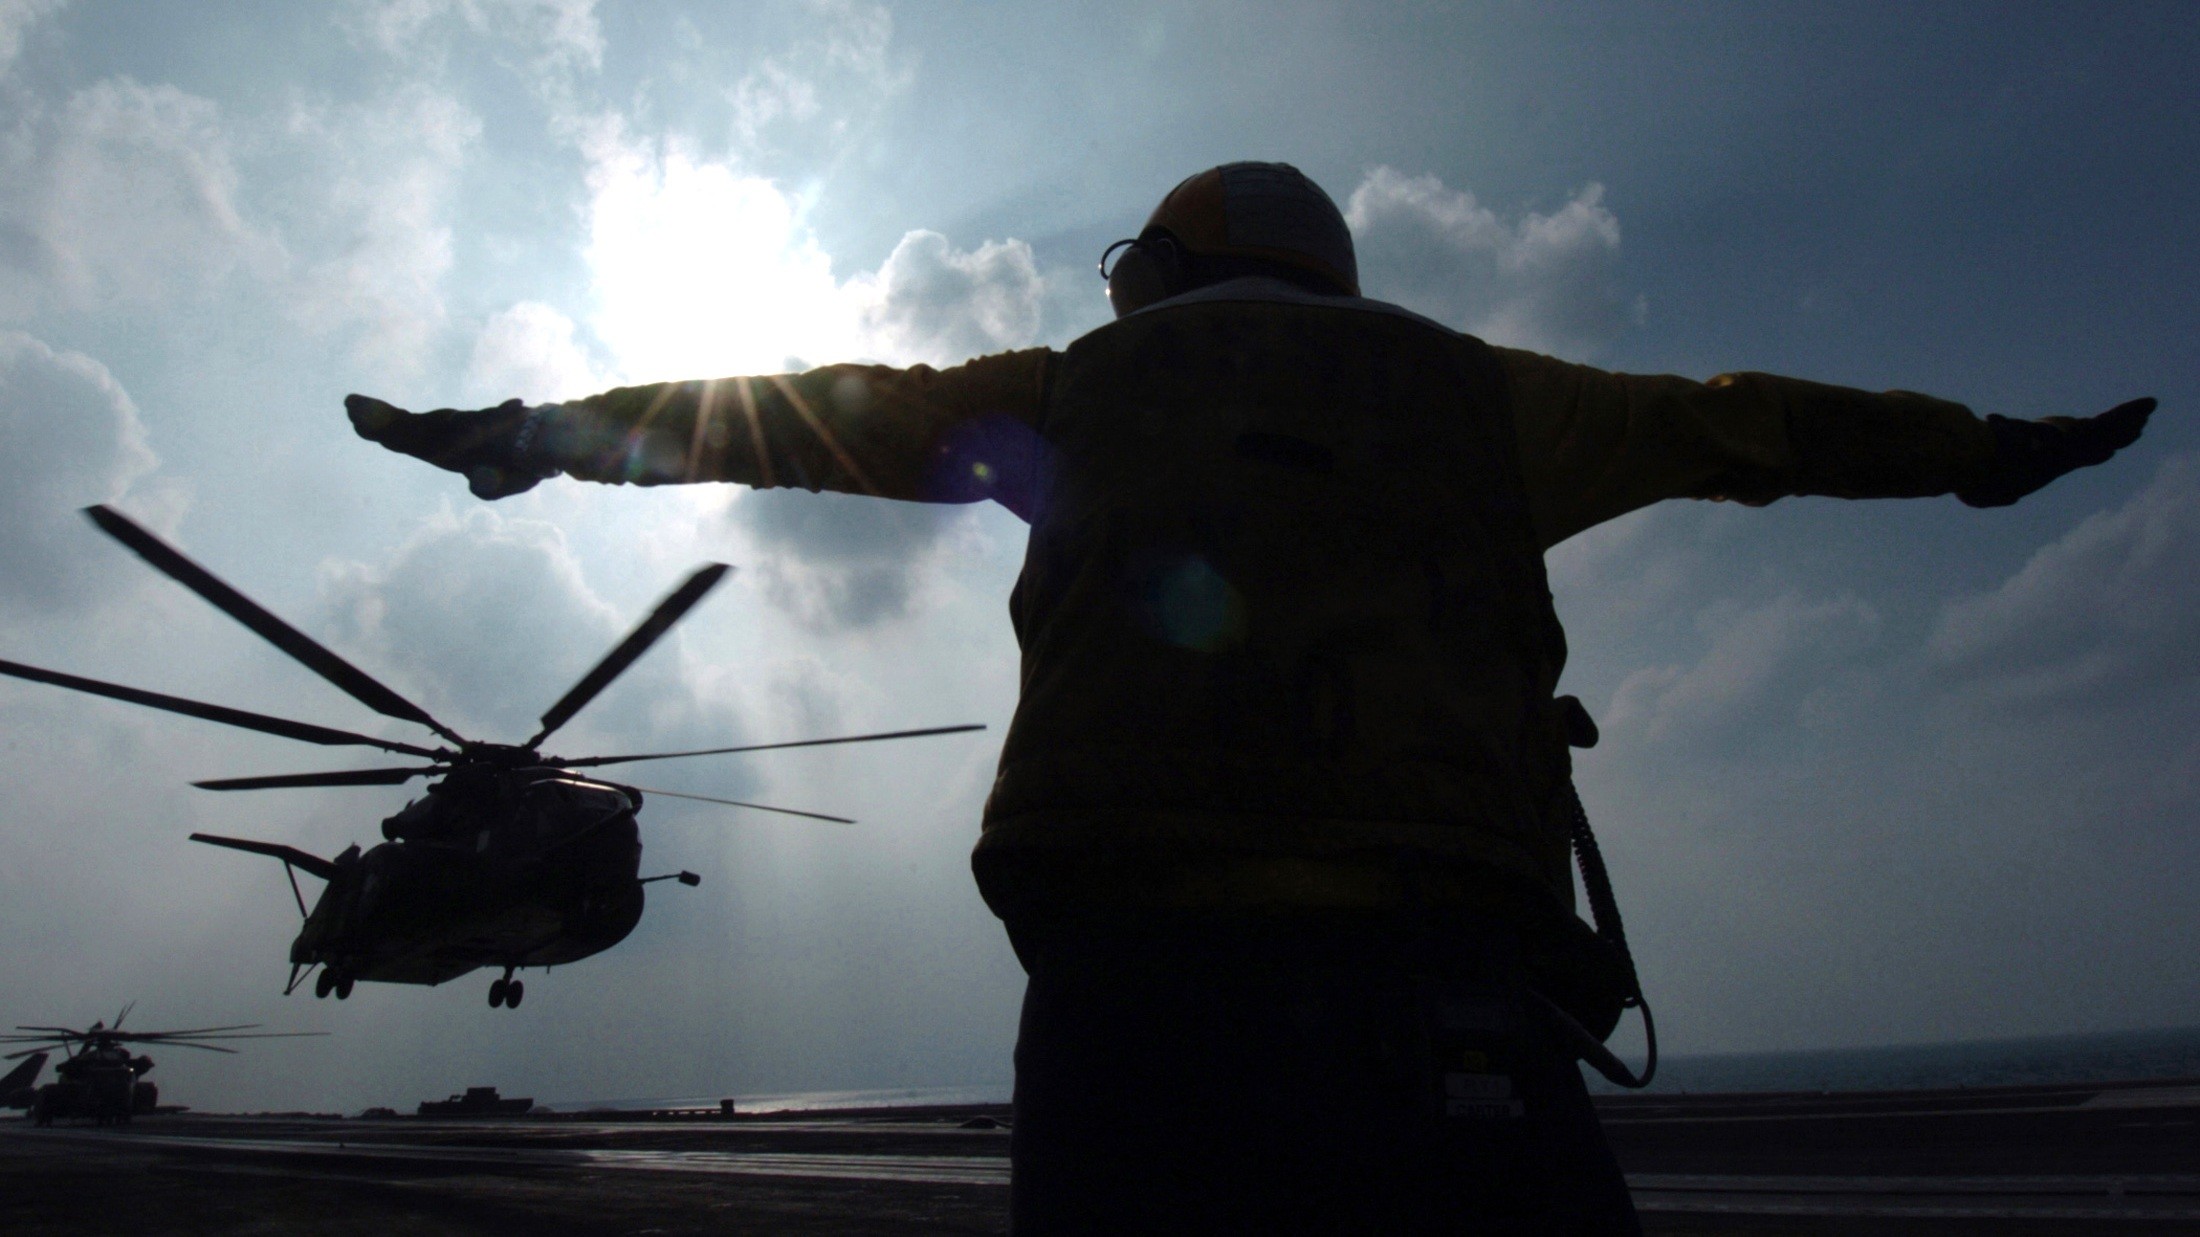 … navy wallpaper 4 US serviceman signals helicopter at the Gulf south of  Iraq …